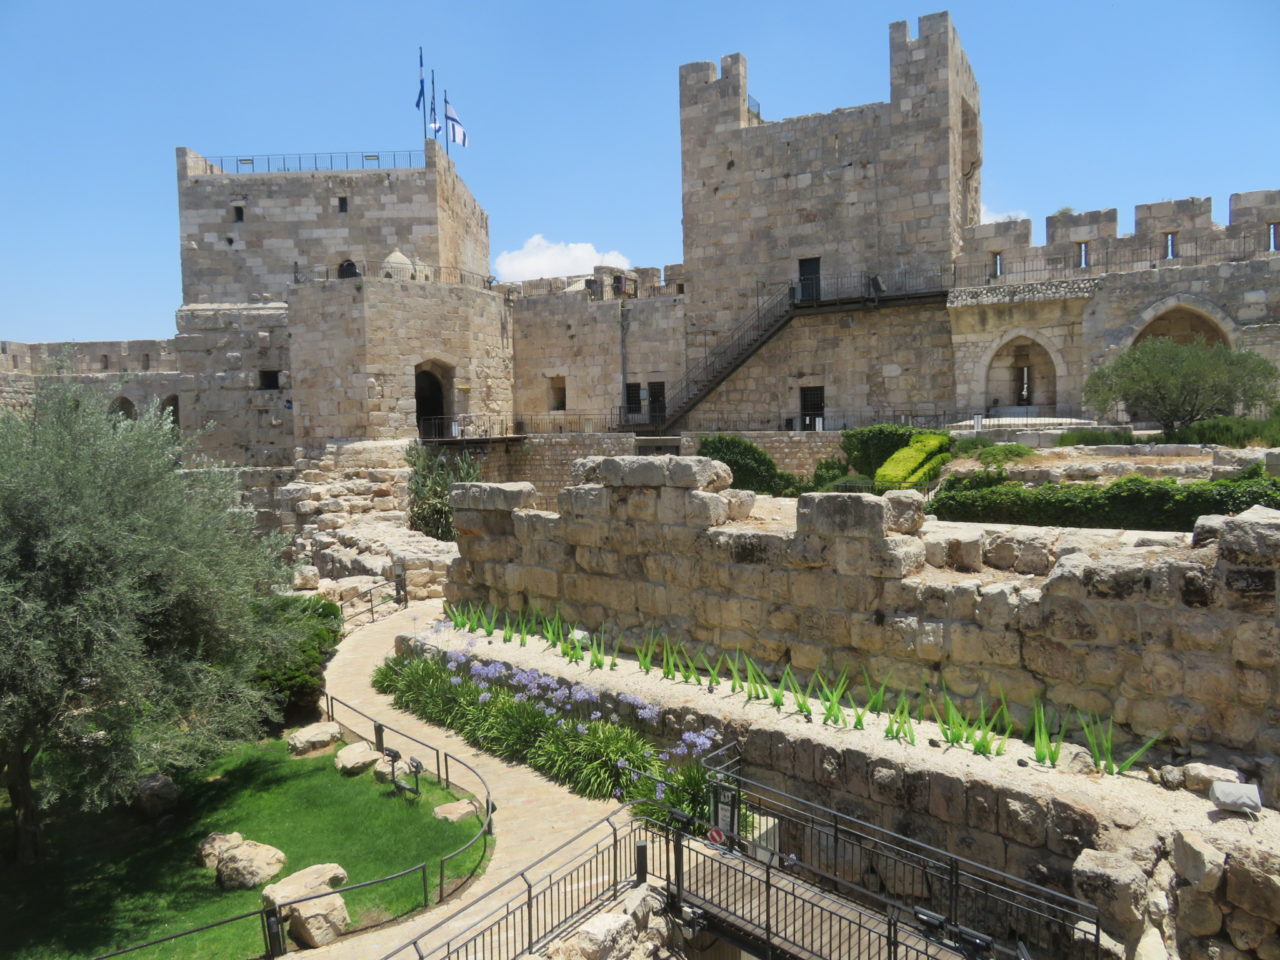 The joys of walking Jerusalem - Fortifications from different time periods (Ottoman, Crusader, ...) at the Tower of David